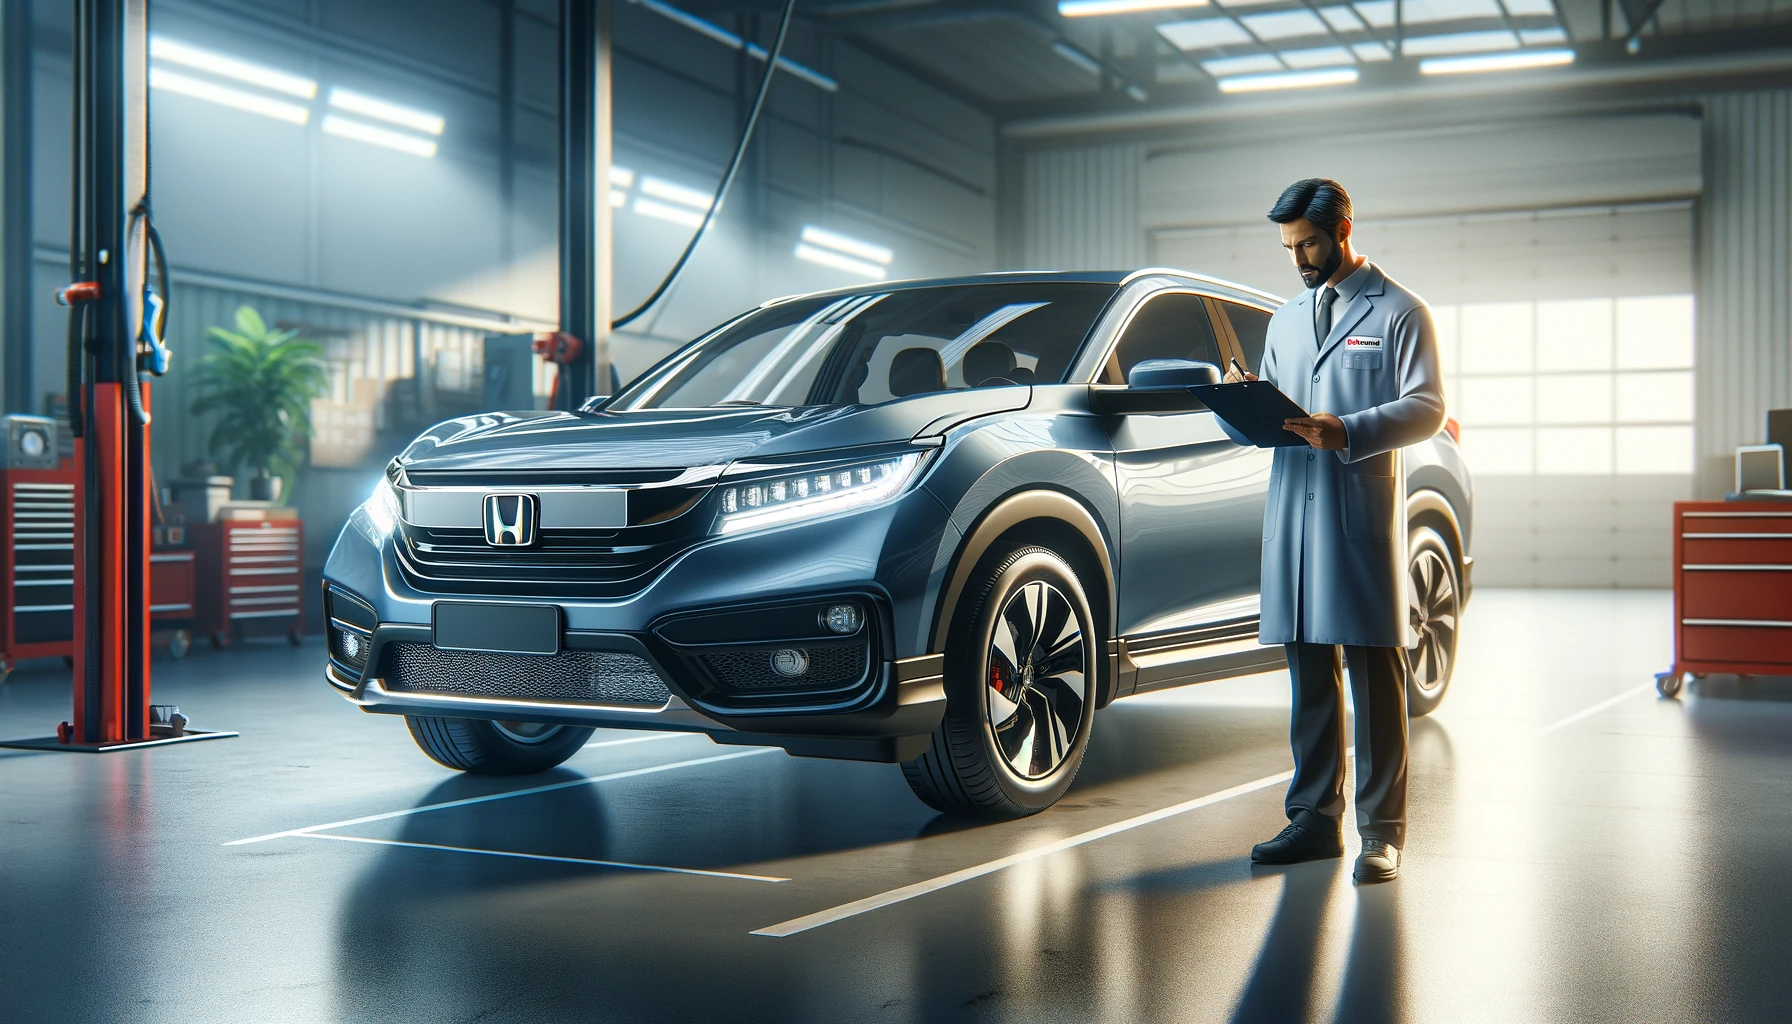 A Honda vehicle undergoing a safety check by a mechanic with diagnostic tools, symbolizing Honda's commitment to reliability and customer safety in the wake of a major recall.